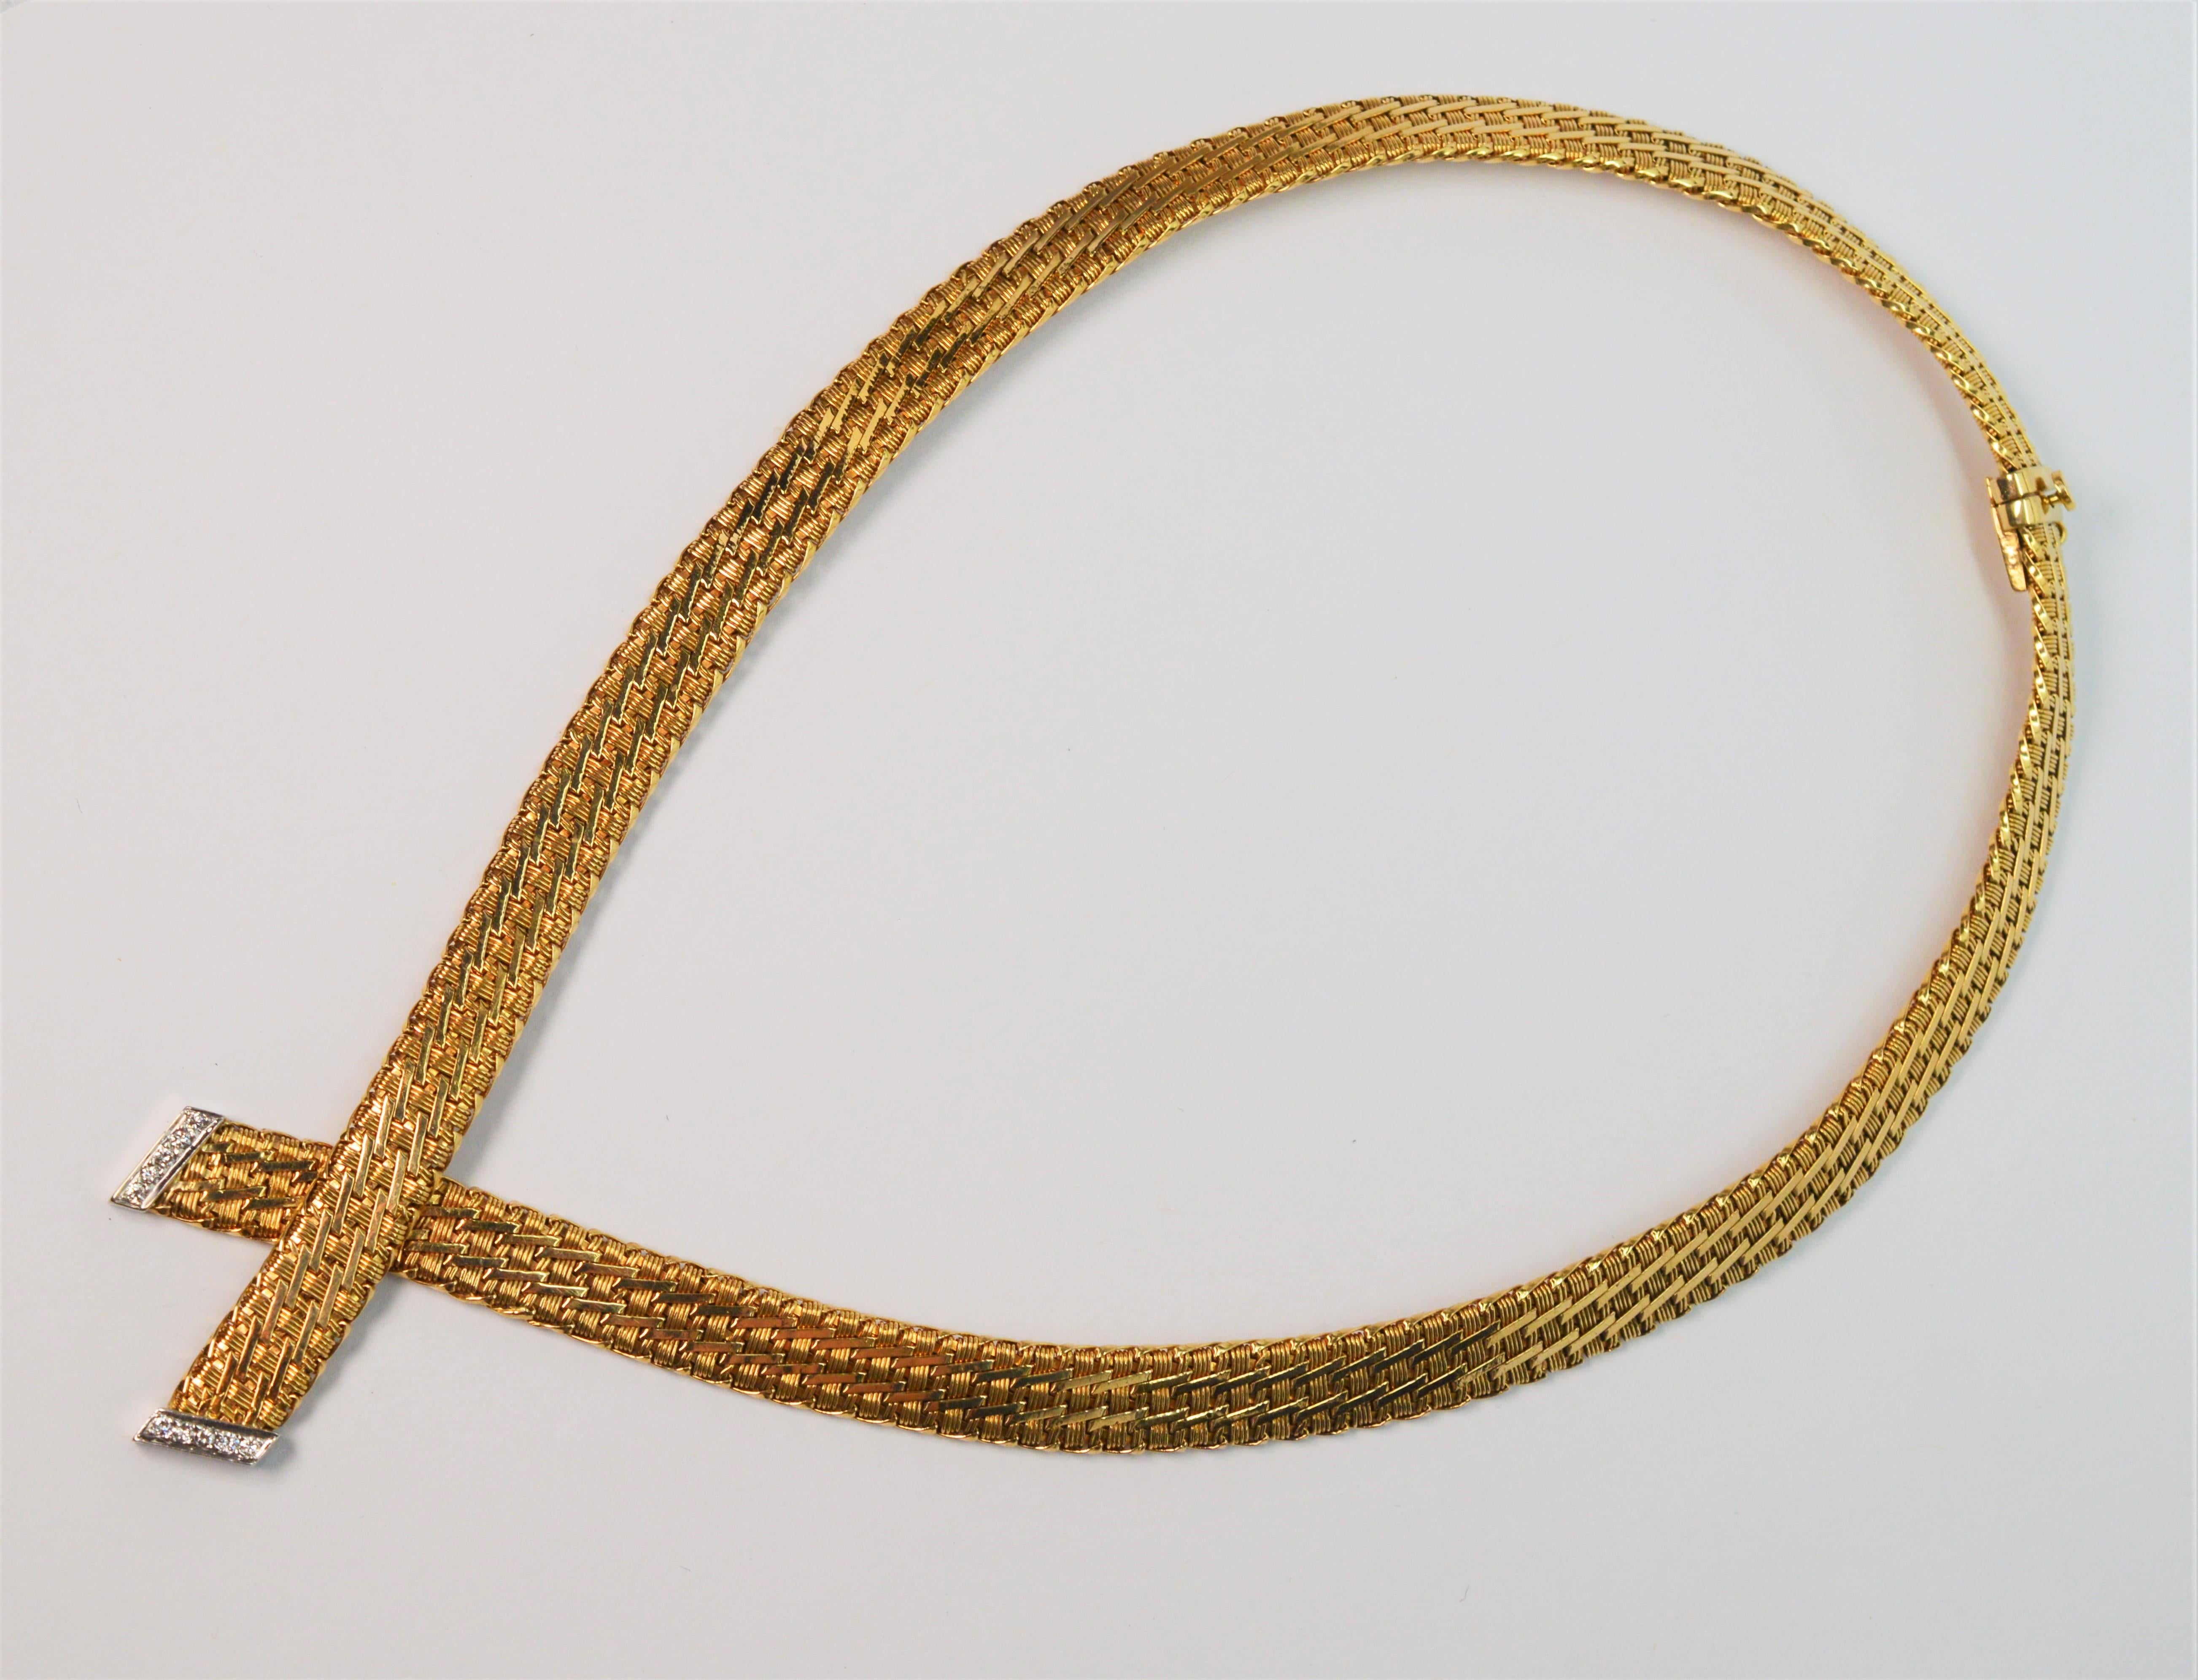 Yellow Gold Rope Bow Tie Choker Necklace with Diamond White Gold Accents For Sale 2